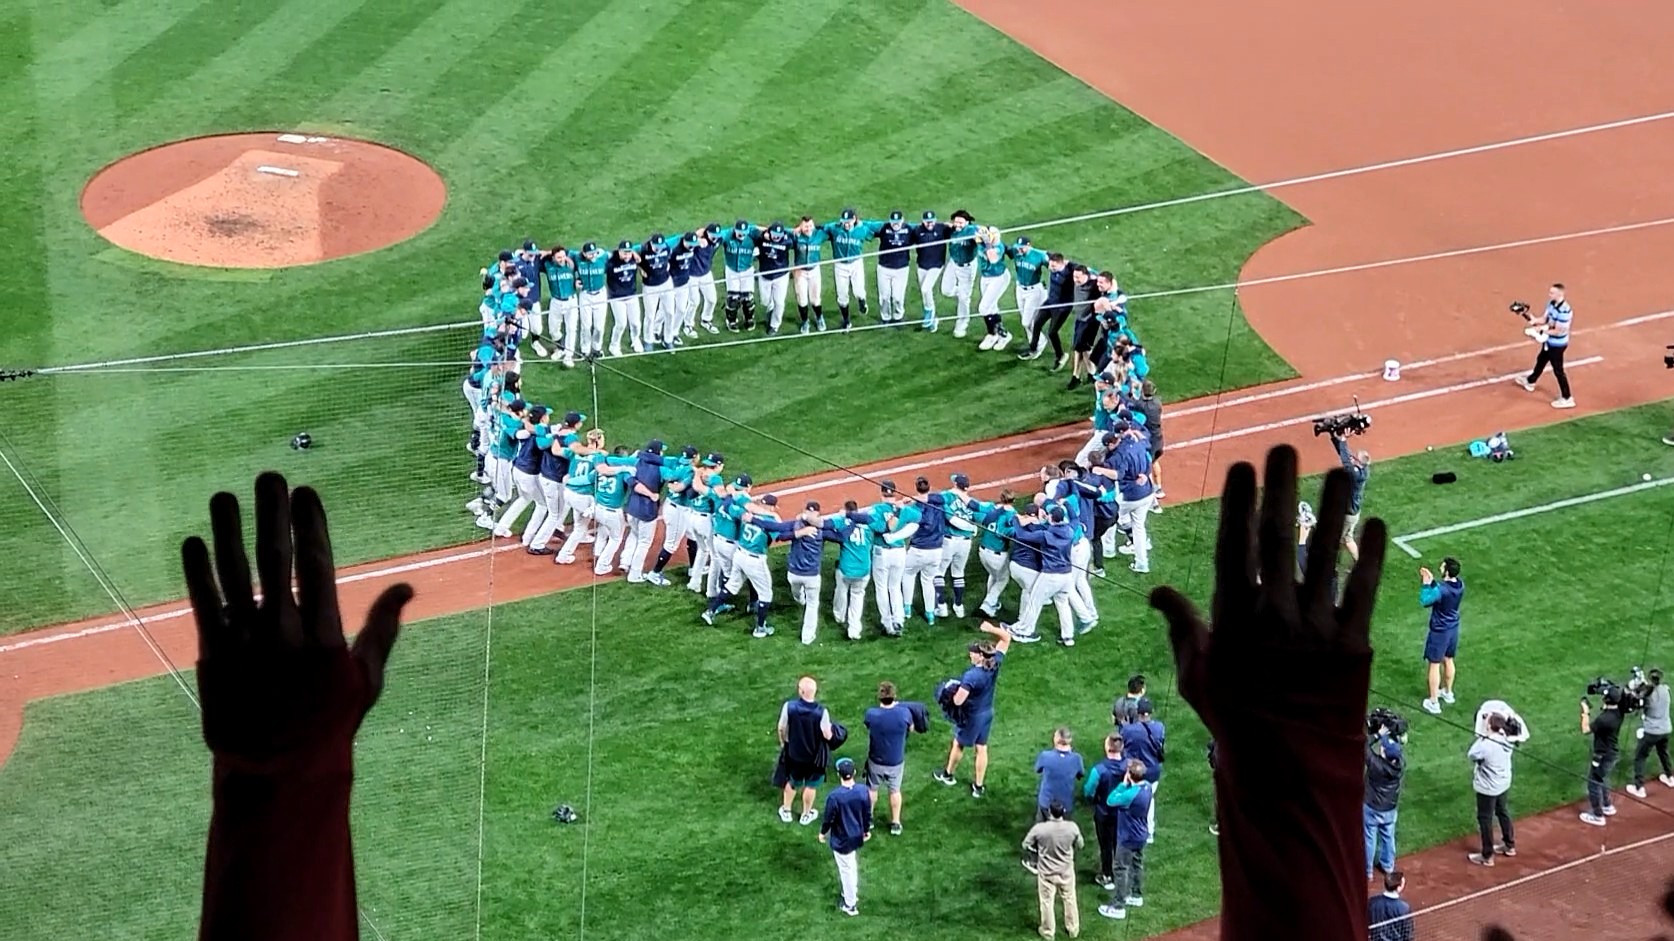 KUOW - Mariners fans celebrate a walk-off to the playoffs after